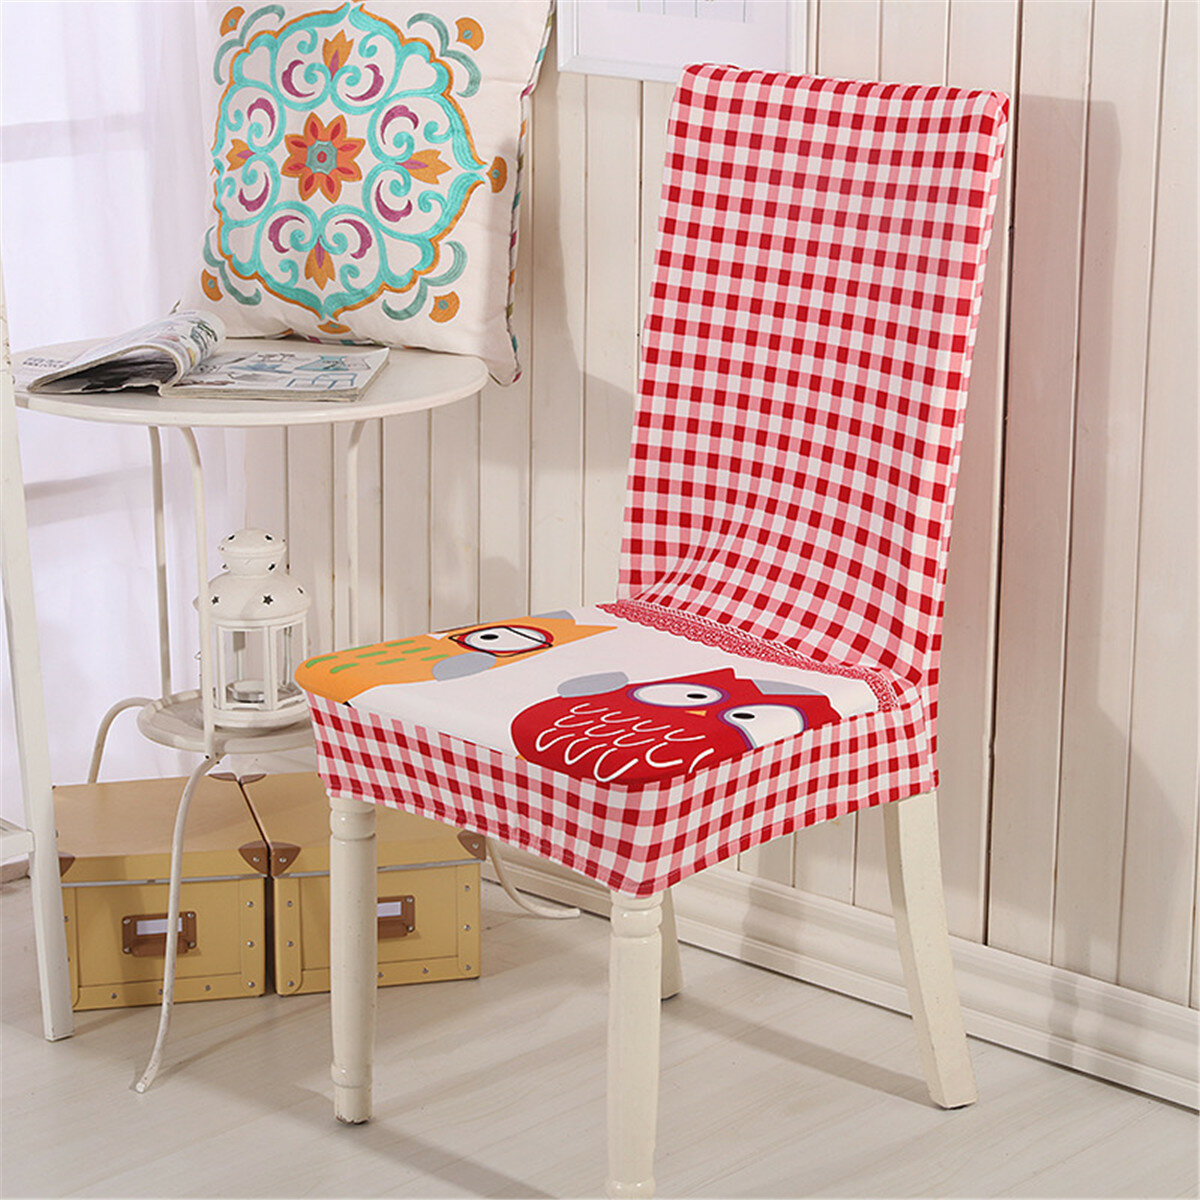 

European Style Removable Chair Cover Protector Seat Covering Hotel Ceremony Dining Room Decor